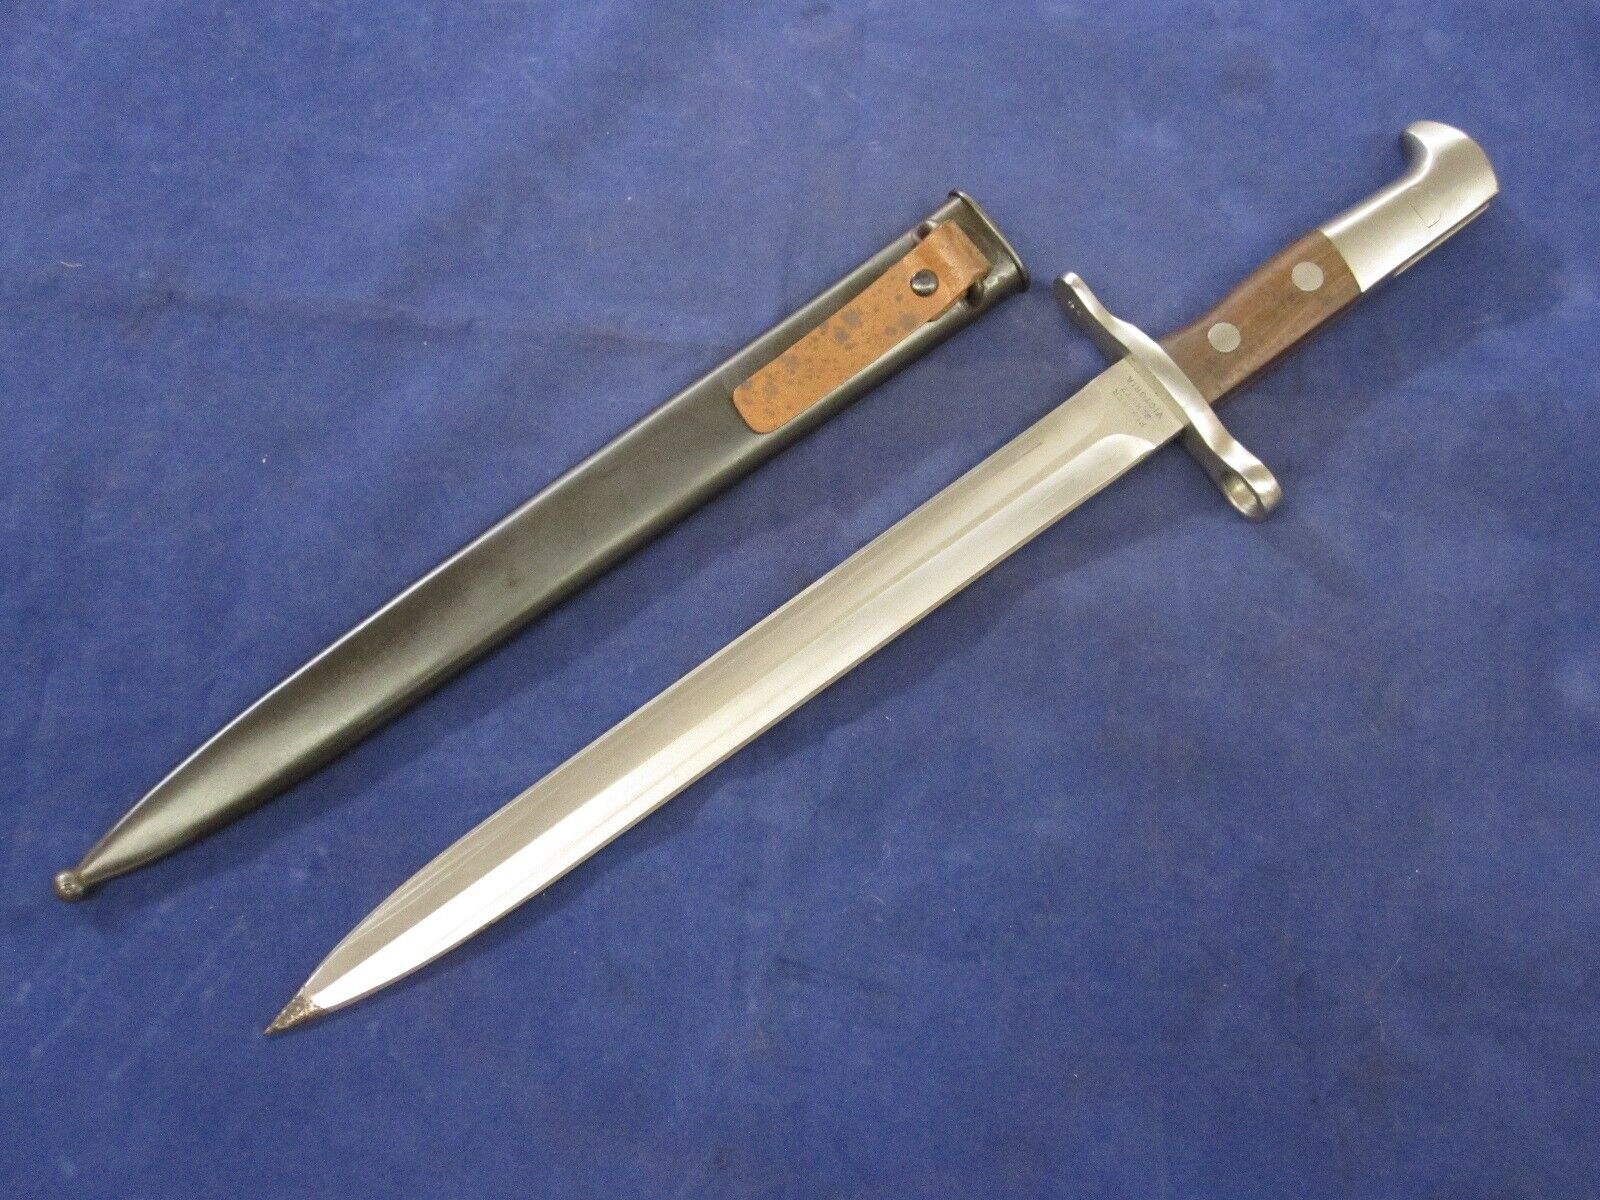 One Swiss K31 Bayonet with Scabbard - No Serials, Unissued - Blemished.